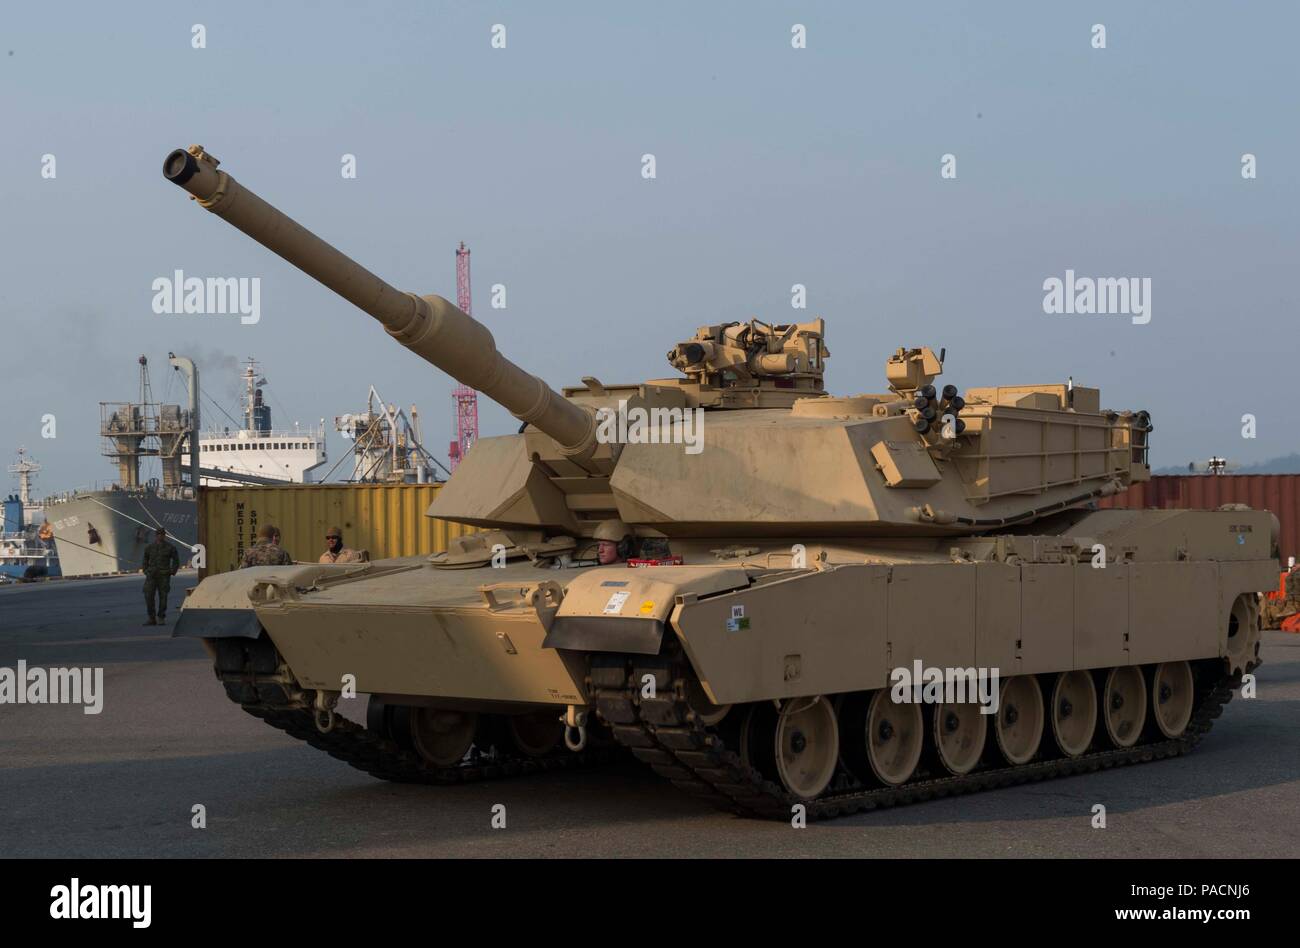 160314-N-RM689-042  GWANGYANG, Republic of Korea (Mar. 14, 2016)- An M1A1 Abram tank attached to Delta Company 1st Tank Battalion, 1st U.S. Marine Division drives into position on the pier to be lifted by two cranes onto amphibious dock landing ship USS Ashland (LSD 48) to prepare for the Assault Follow-On Echelon (AFOE) portion of Ssang Yong 16. Ashland is assigned to the Bonhomme Richard Expeditionary Strike Group and is participating in Ssang Yong 16, a biennial combined amphibious exercise conducted by forward-deployed U.S. forces with the Republic of Korea Navy and Marine Corps, Australia Stock Photo